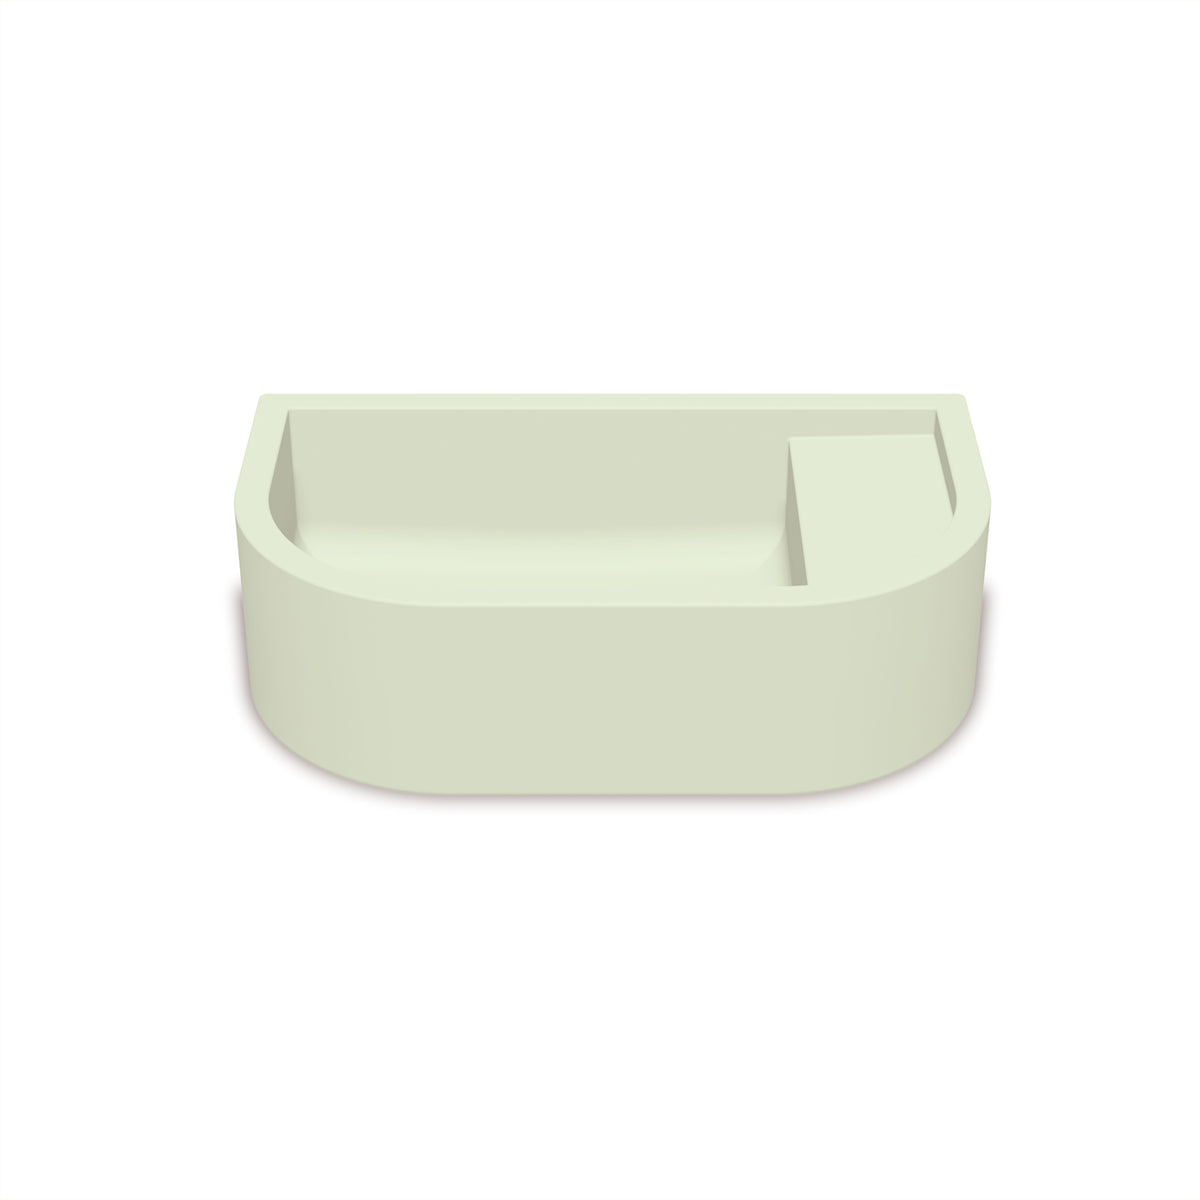 Loop 01 Basin - Overflow - Surface Mount (Mint,No Tap Hole,White)